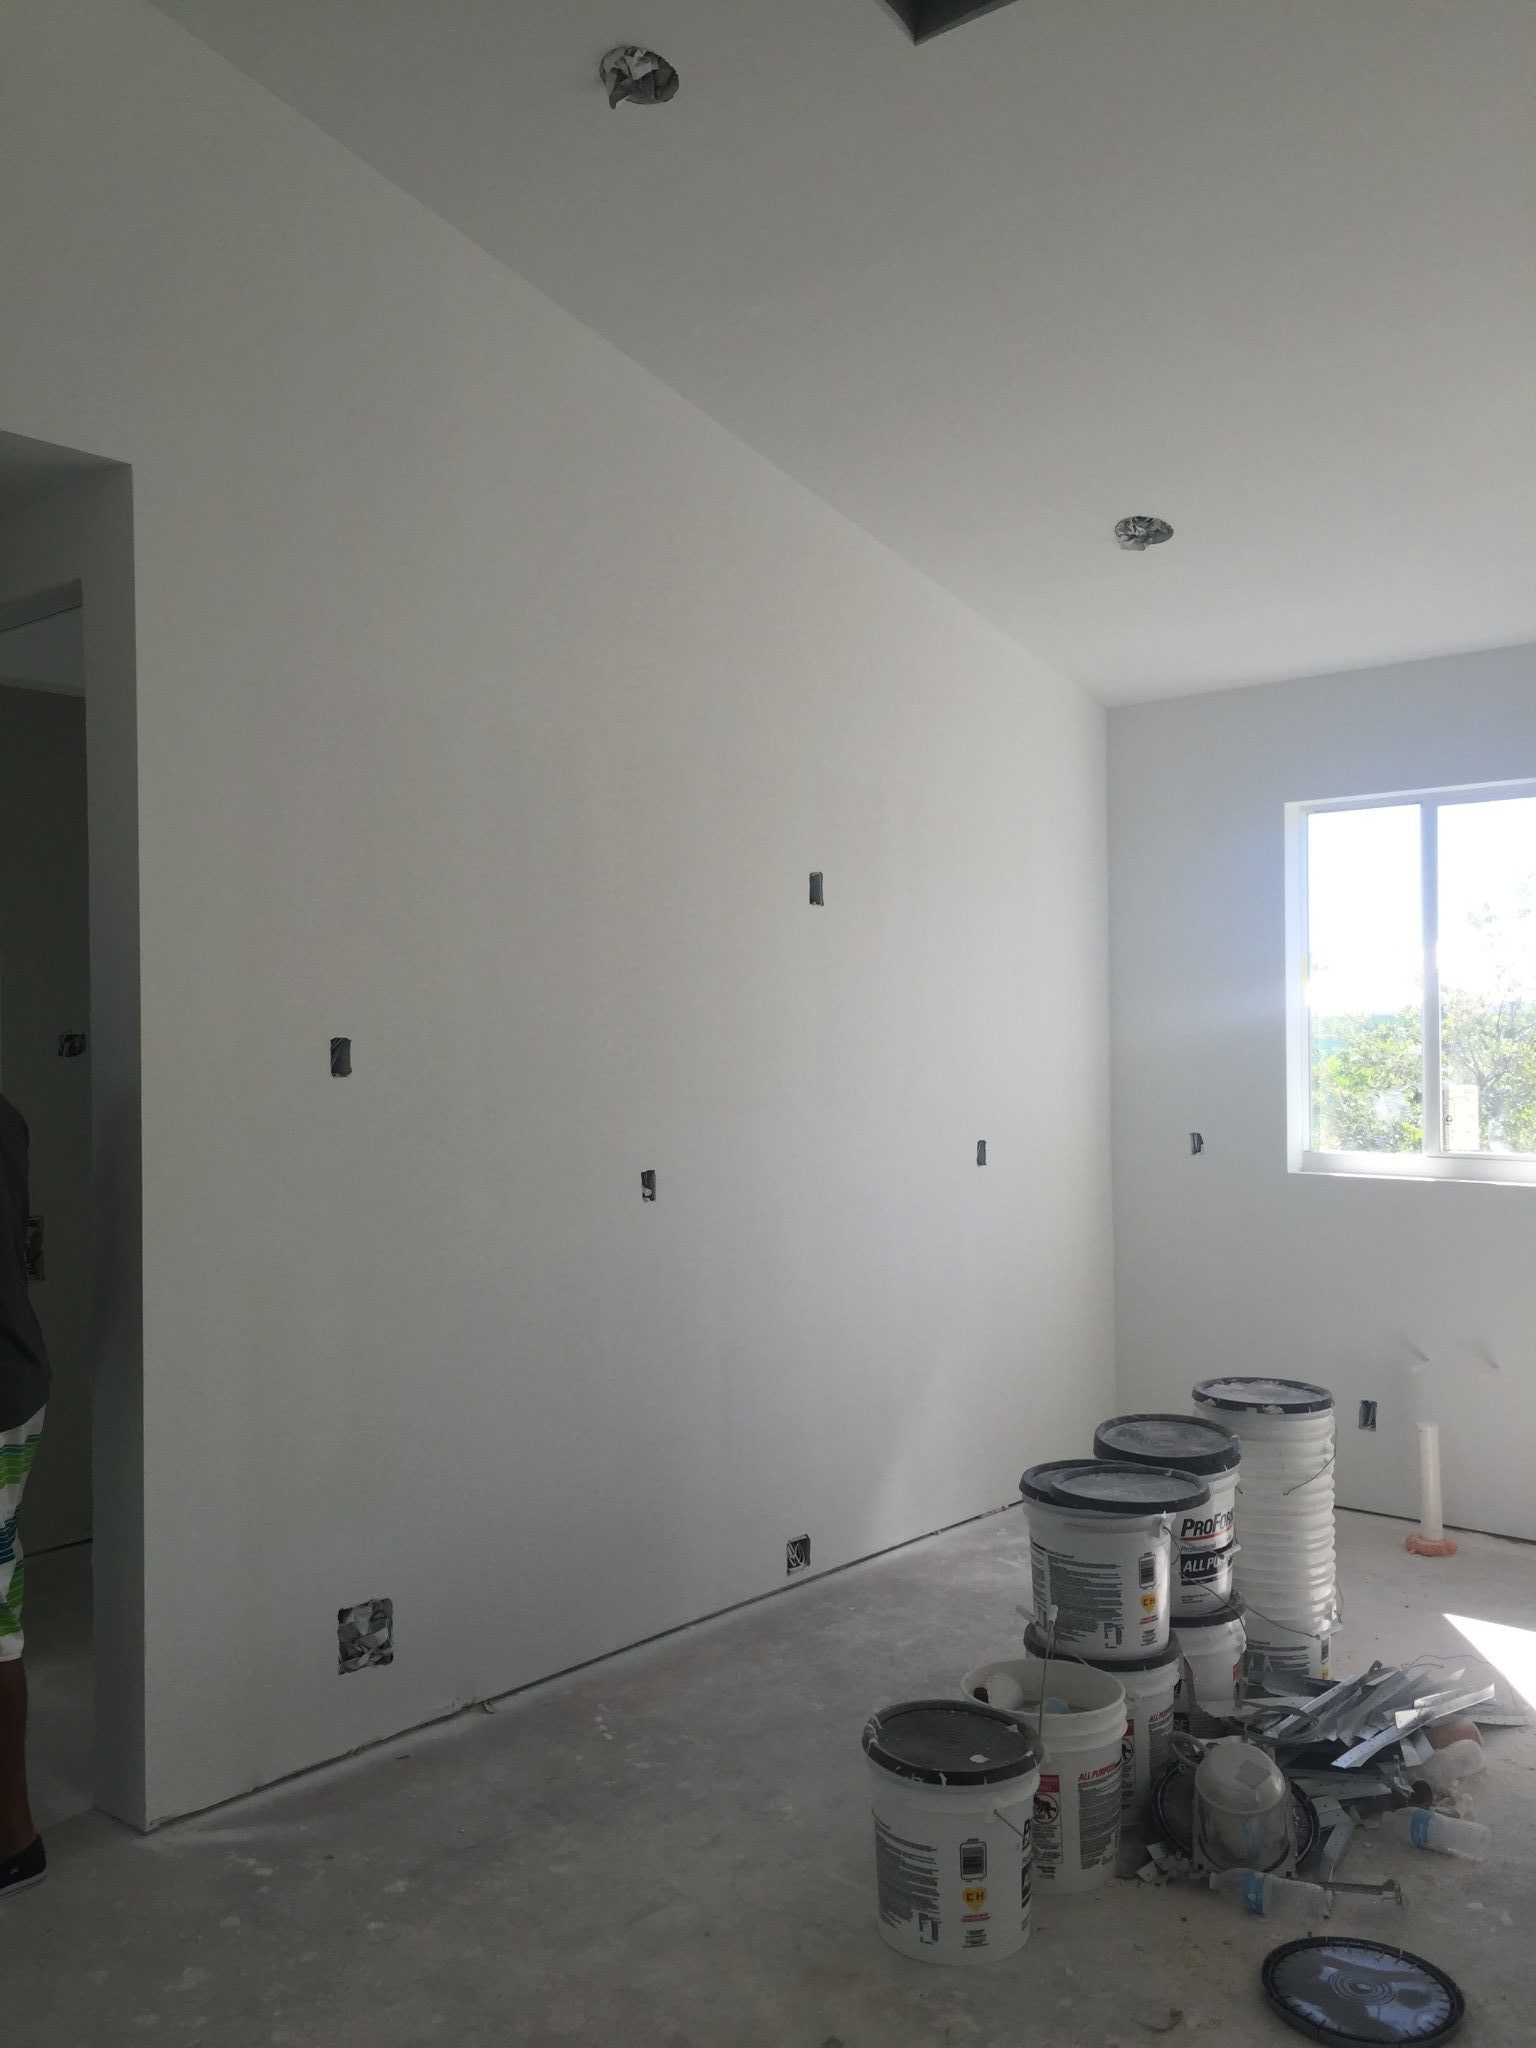 Kitchen progress with drywall, electrical outlets & recessed lighting installed